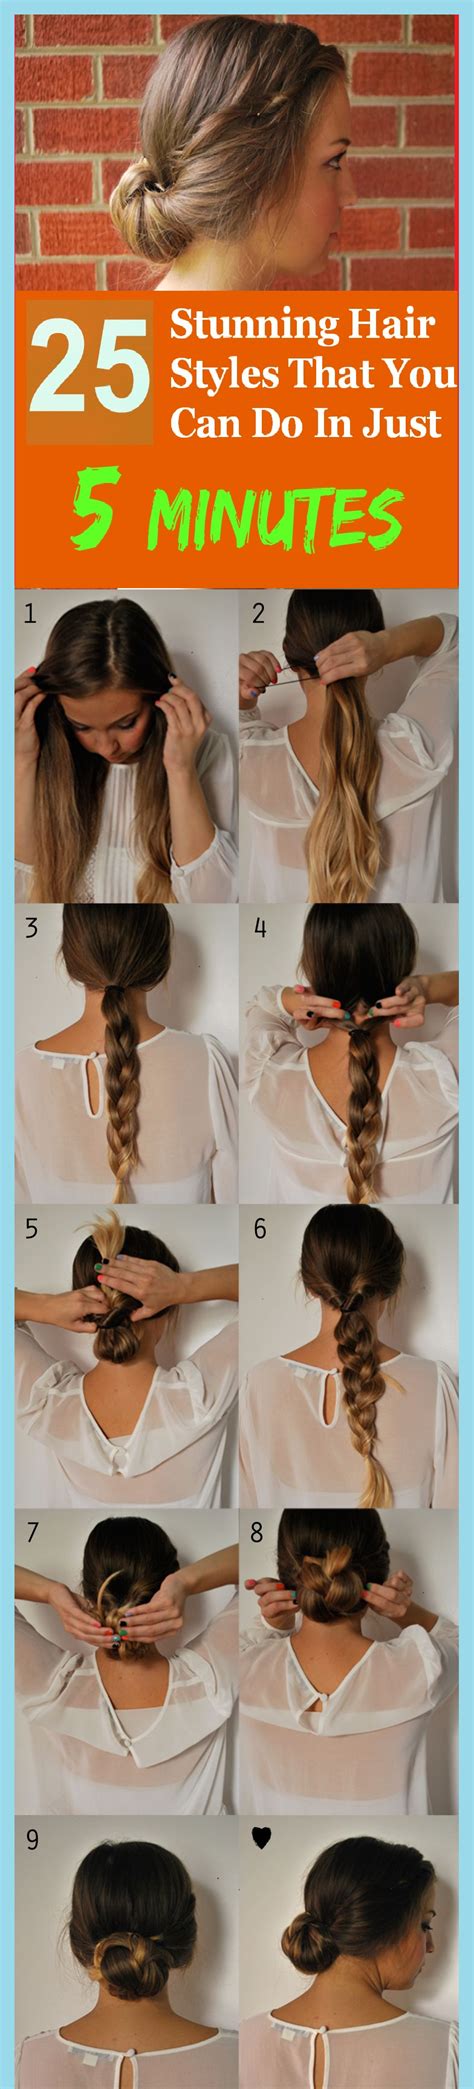 25 Stunning Hair Styles That You Can Do In Just 5 Minutes Hair Styles